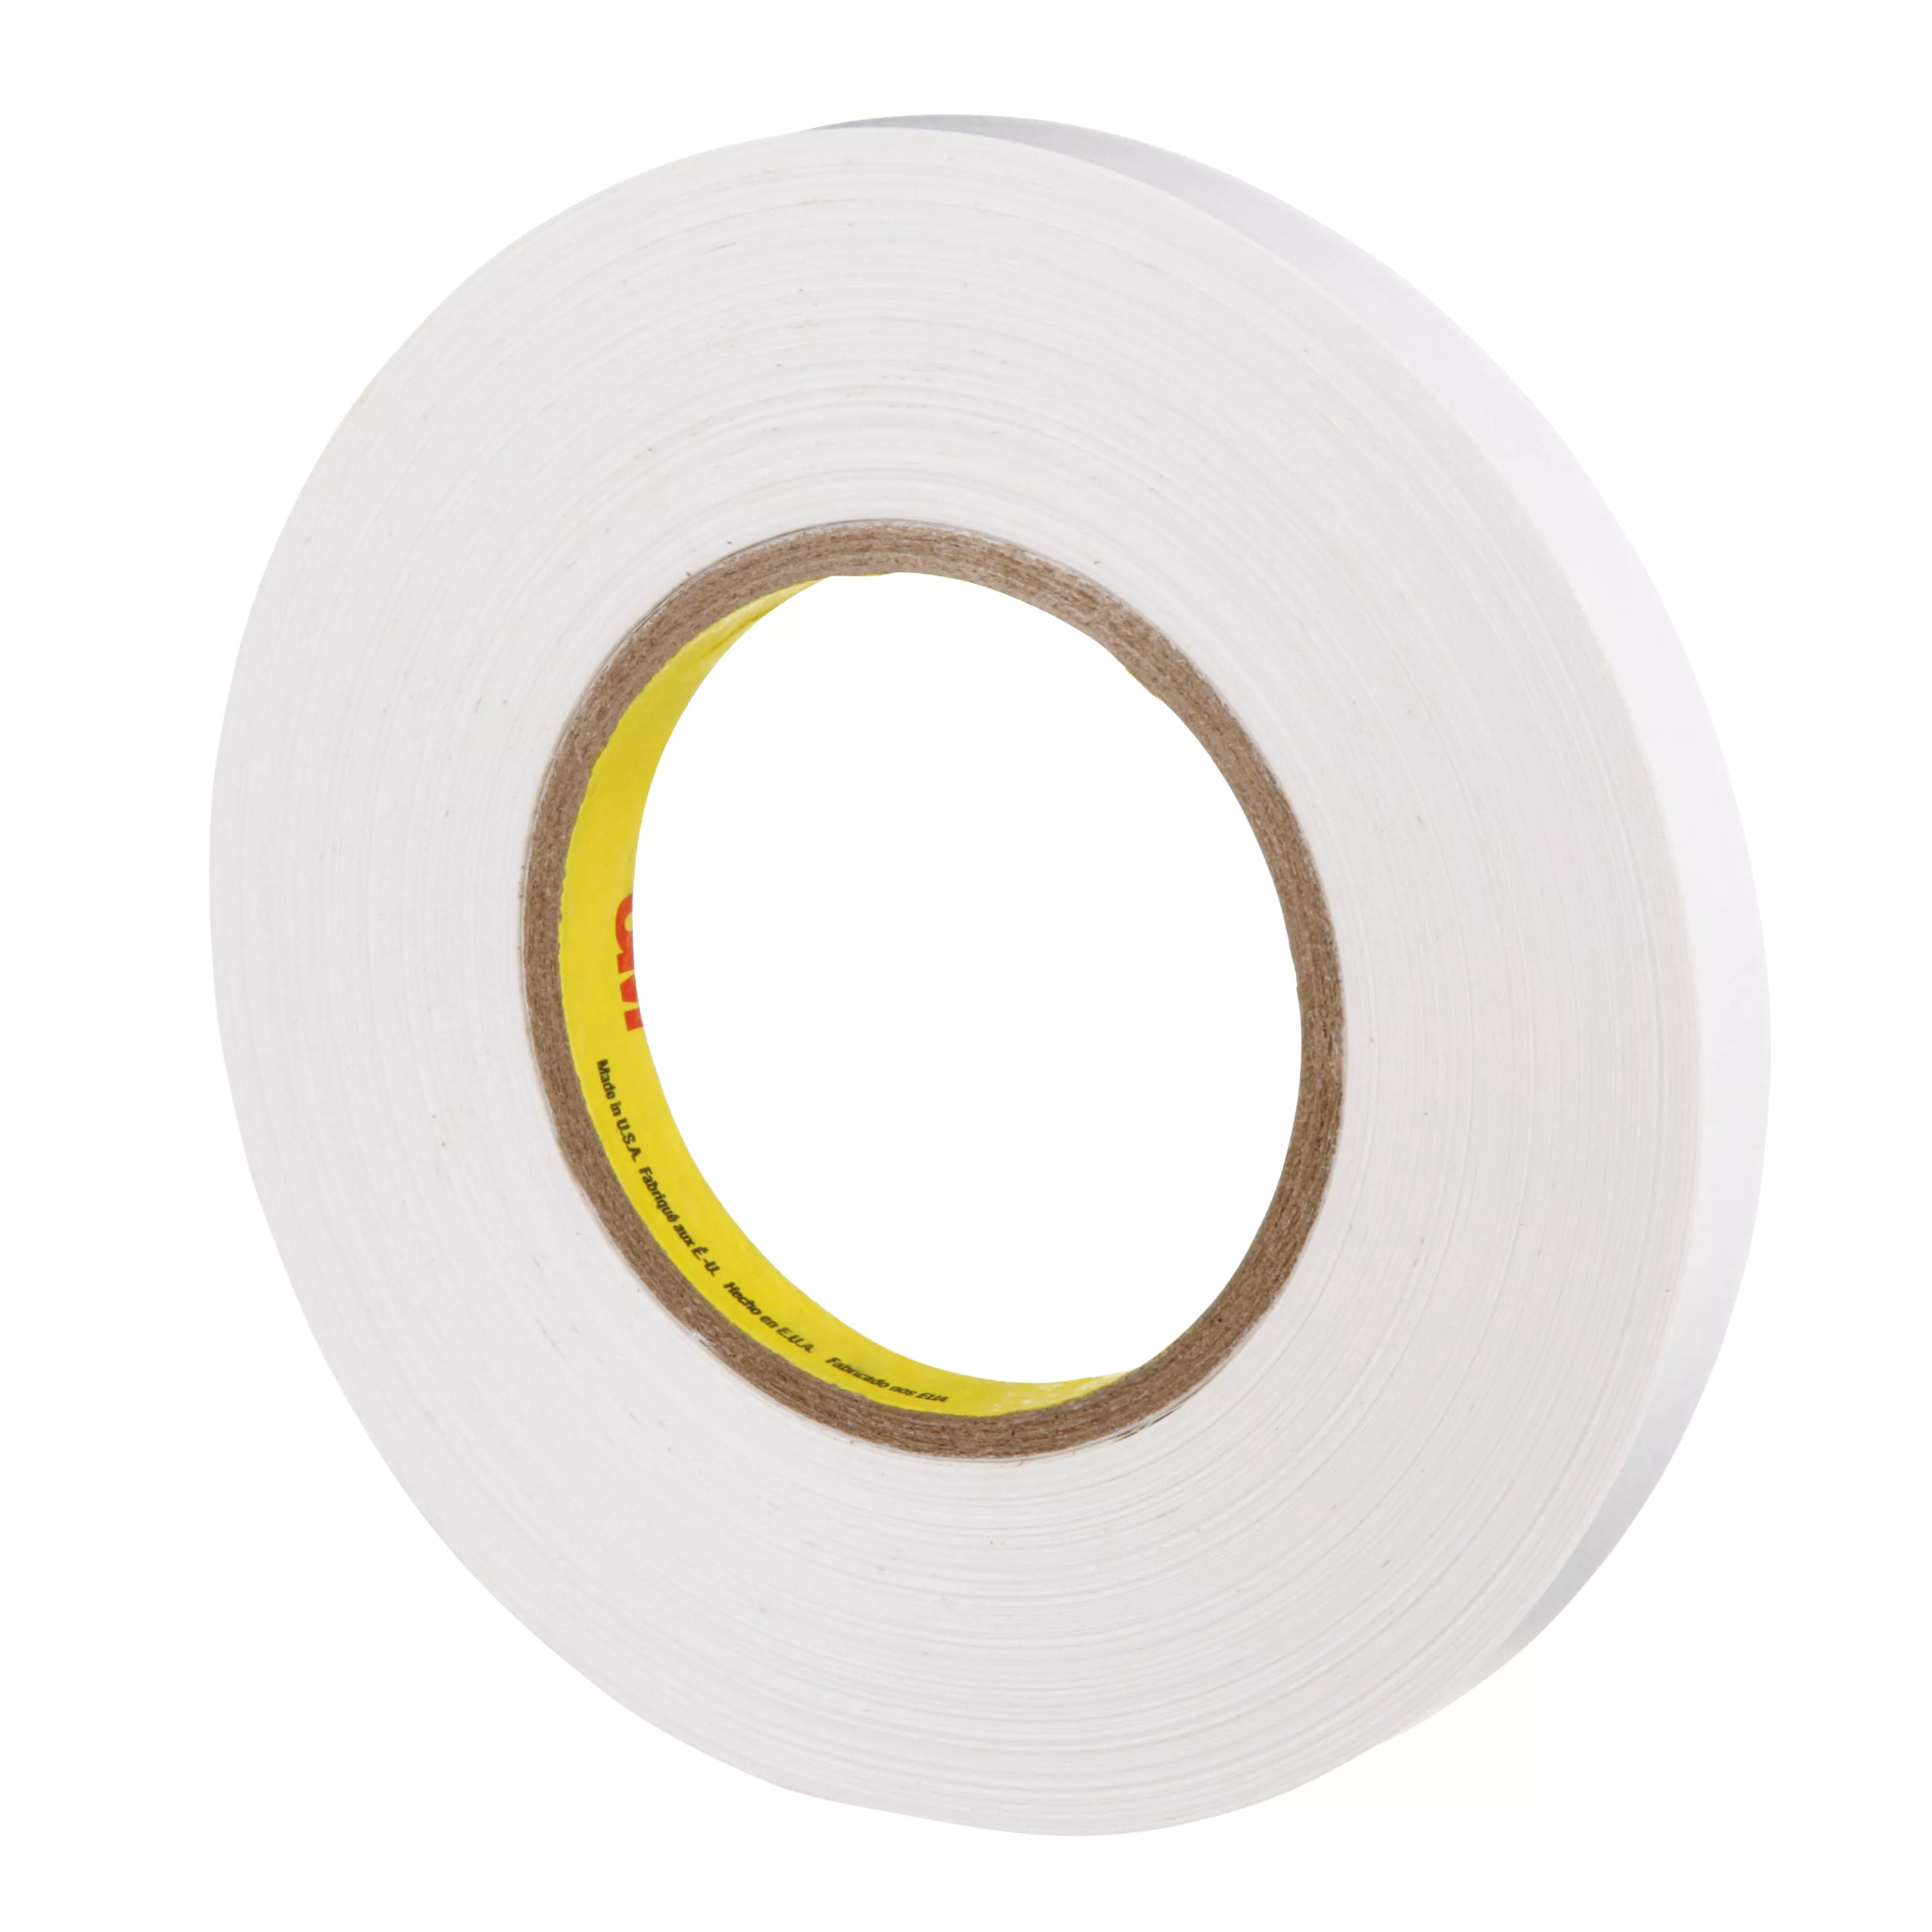 SKU 7000048535 | 3M™ Removable Repositionable Tape 9416